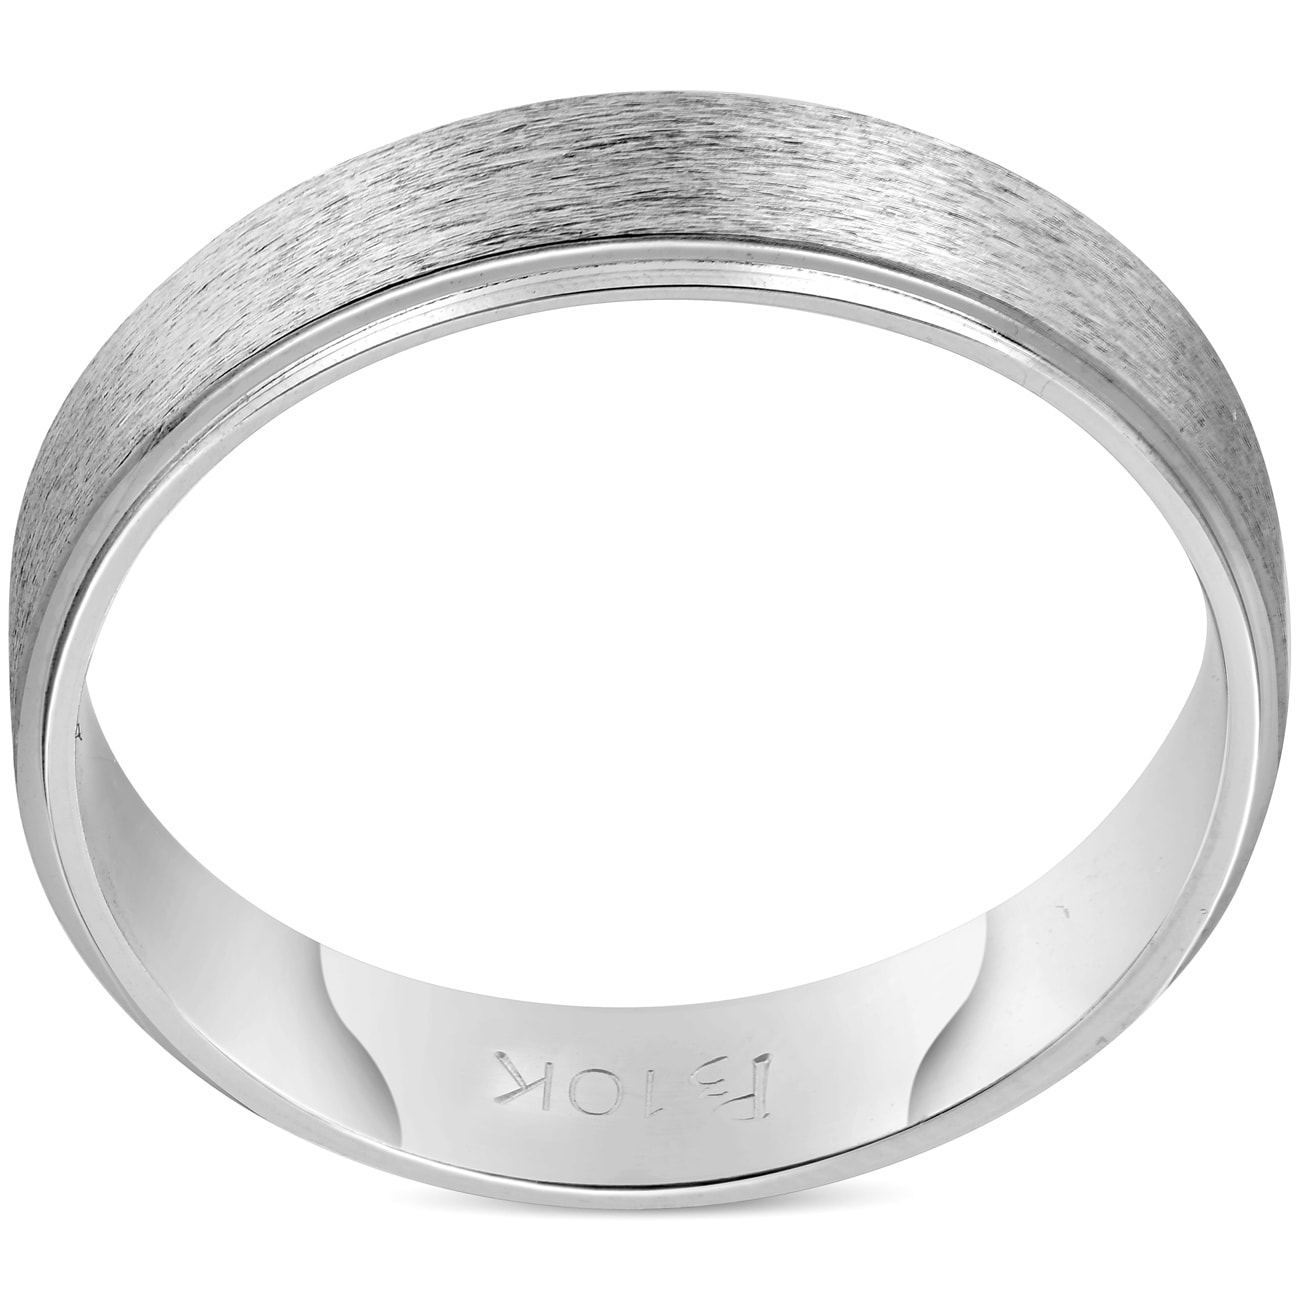 10K White Gold 5mm Standard Flat Comfort Fit Band Ring Size 4 to 14 